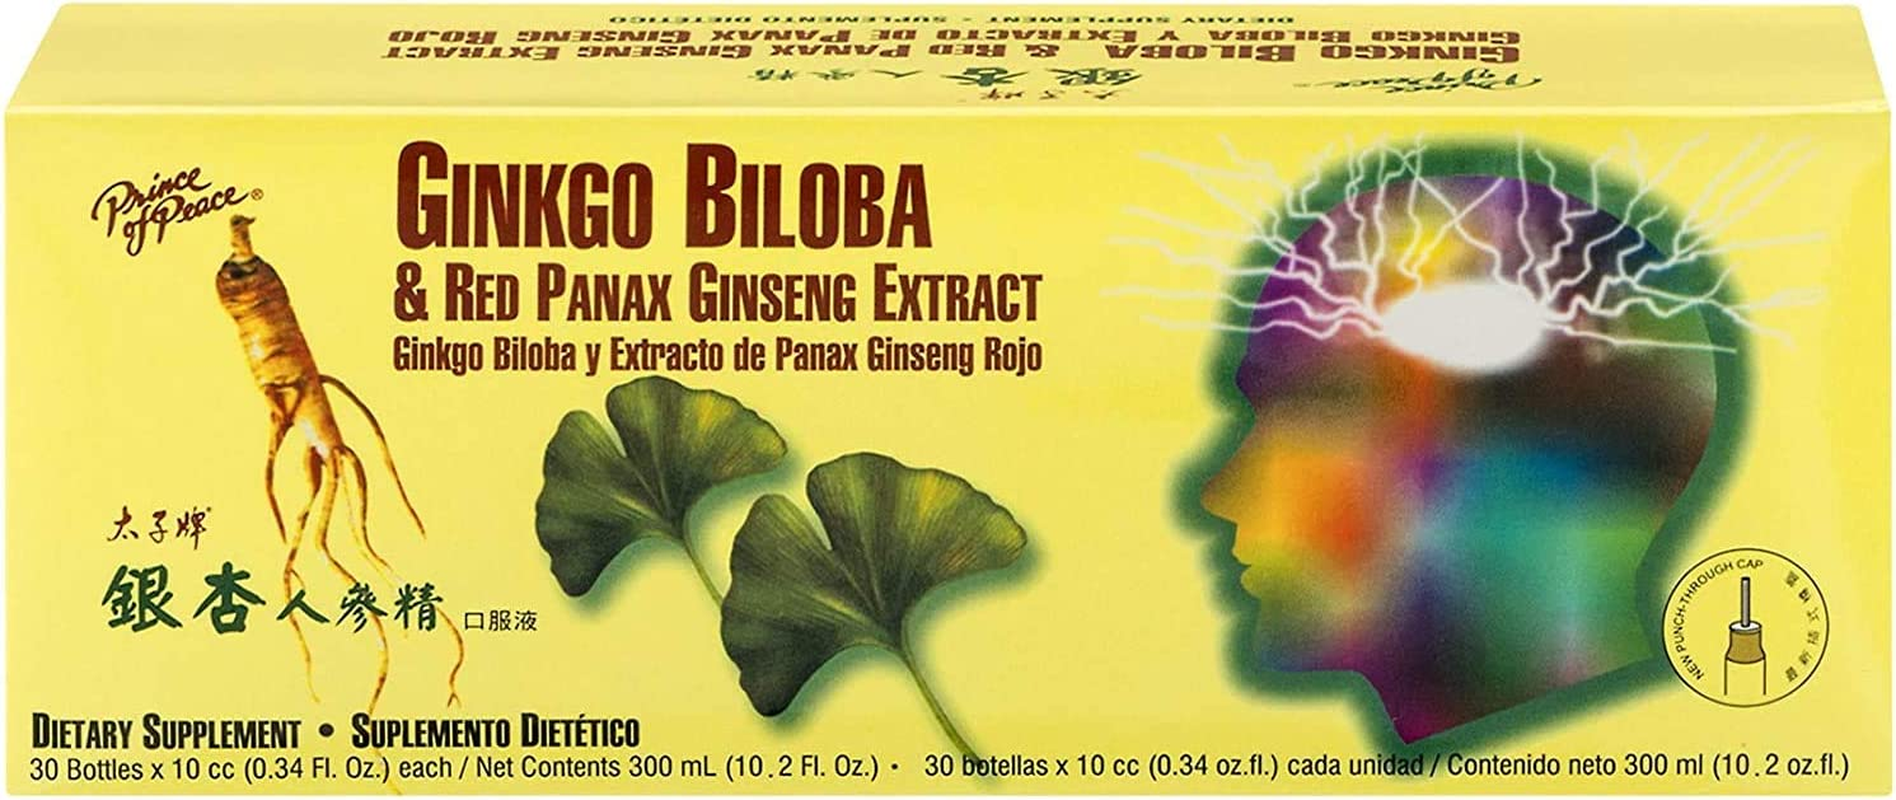 Ginkgo Biloba & Red Panax Ginseng Extract, 0.34 Fl. Oz. Each – Ginkgo Biloba Supplement – Chinese Red Panax Ginseng Extract – Supports Overall Well-Being - 2 Pack - 60 Bottles